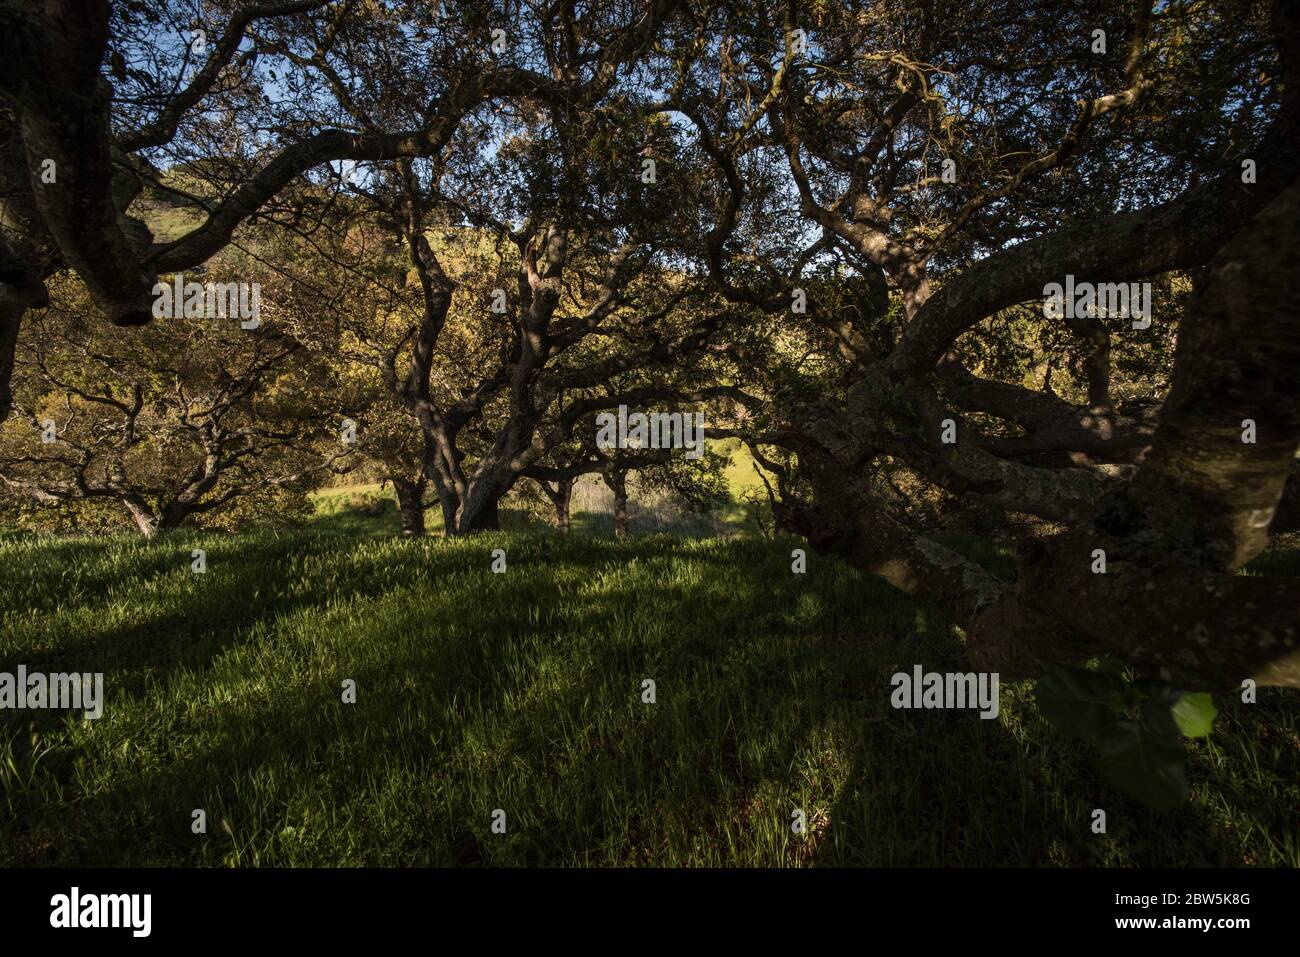 An greenspace filled with oak trees which form a peaceful shaded grove. Stock Photo